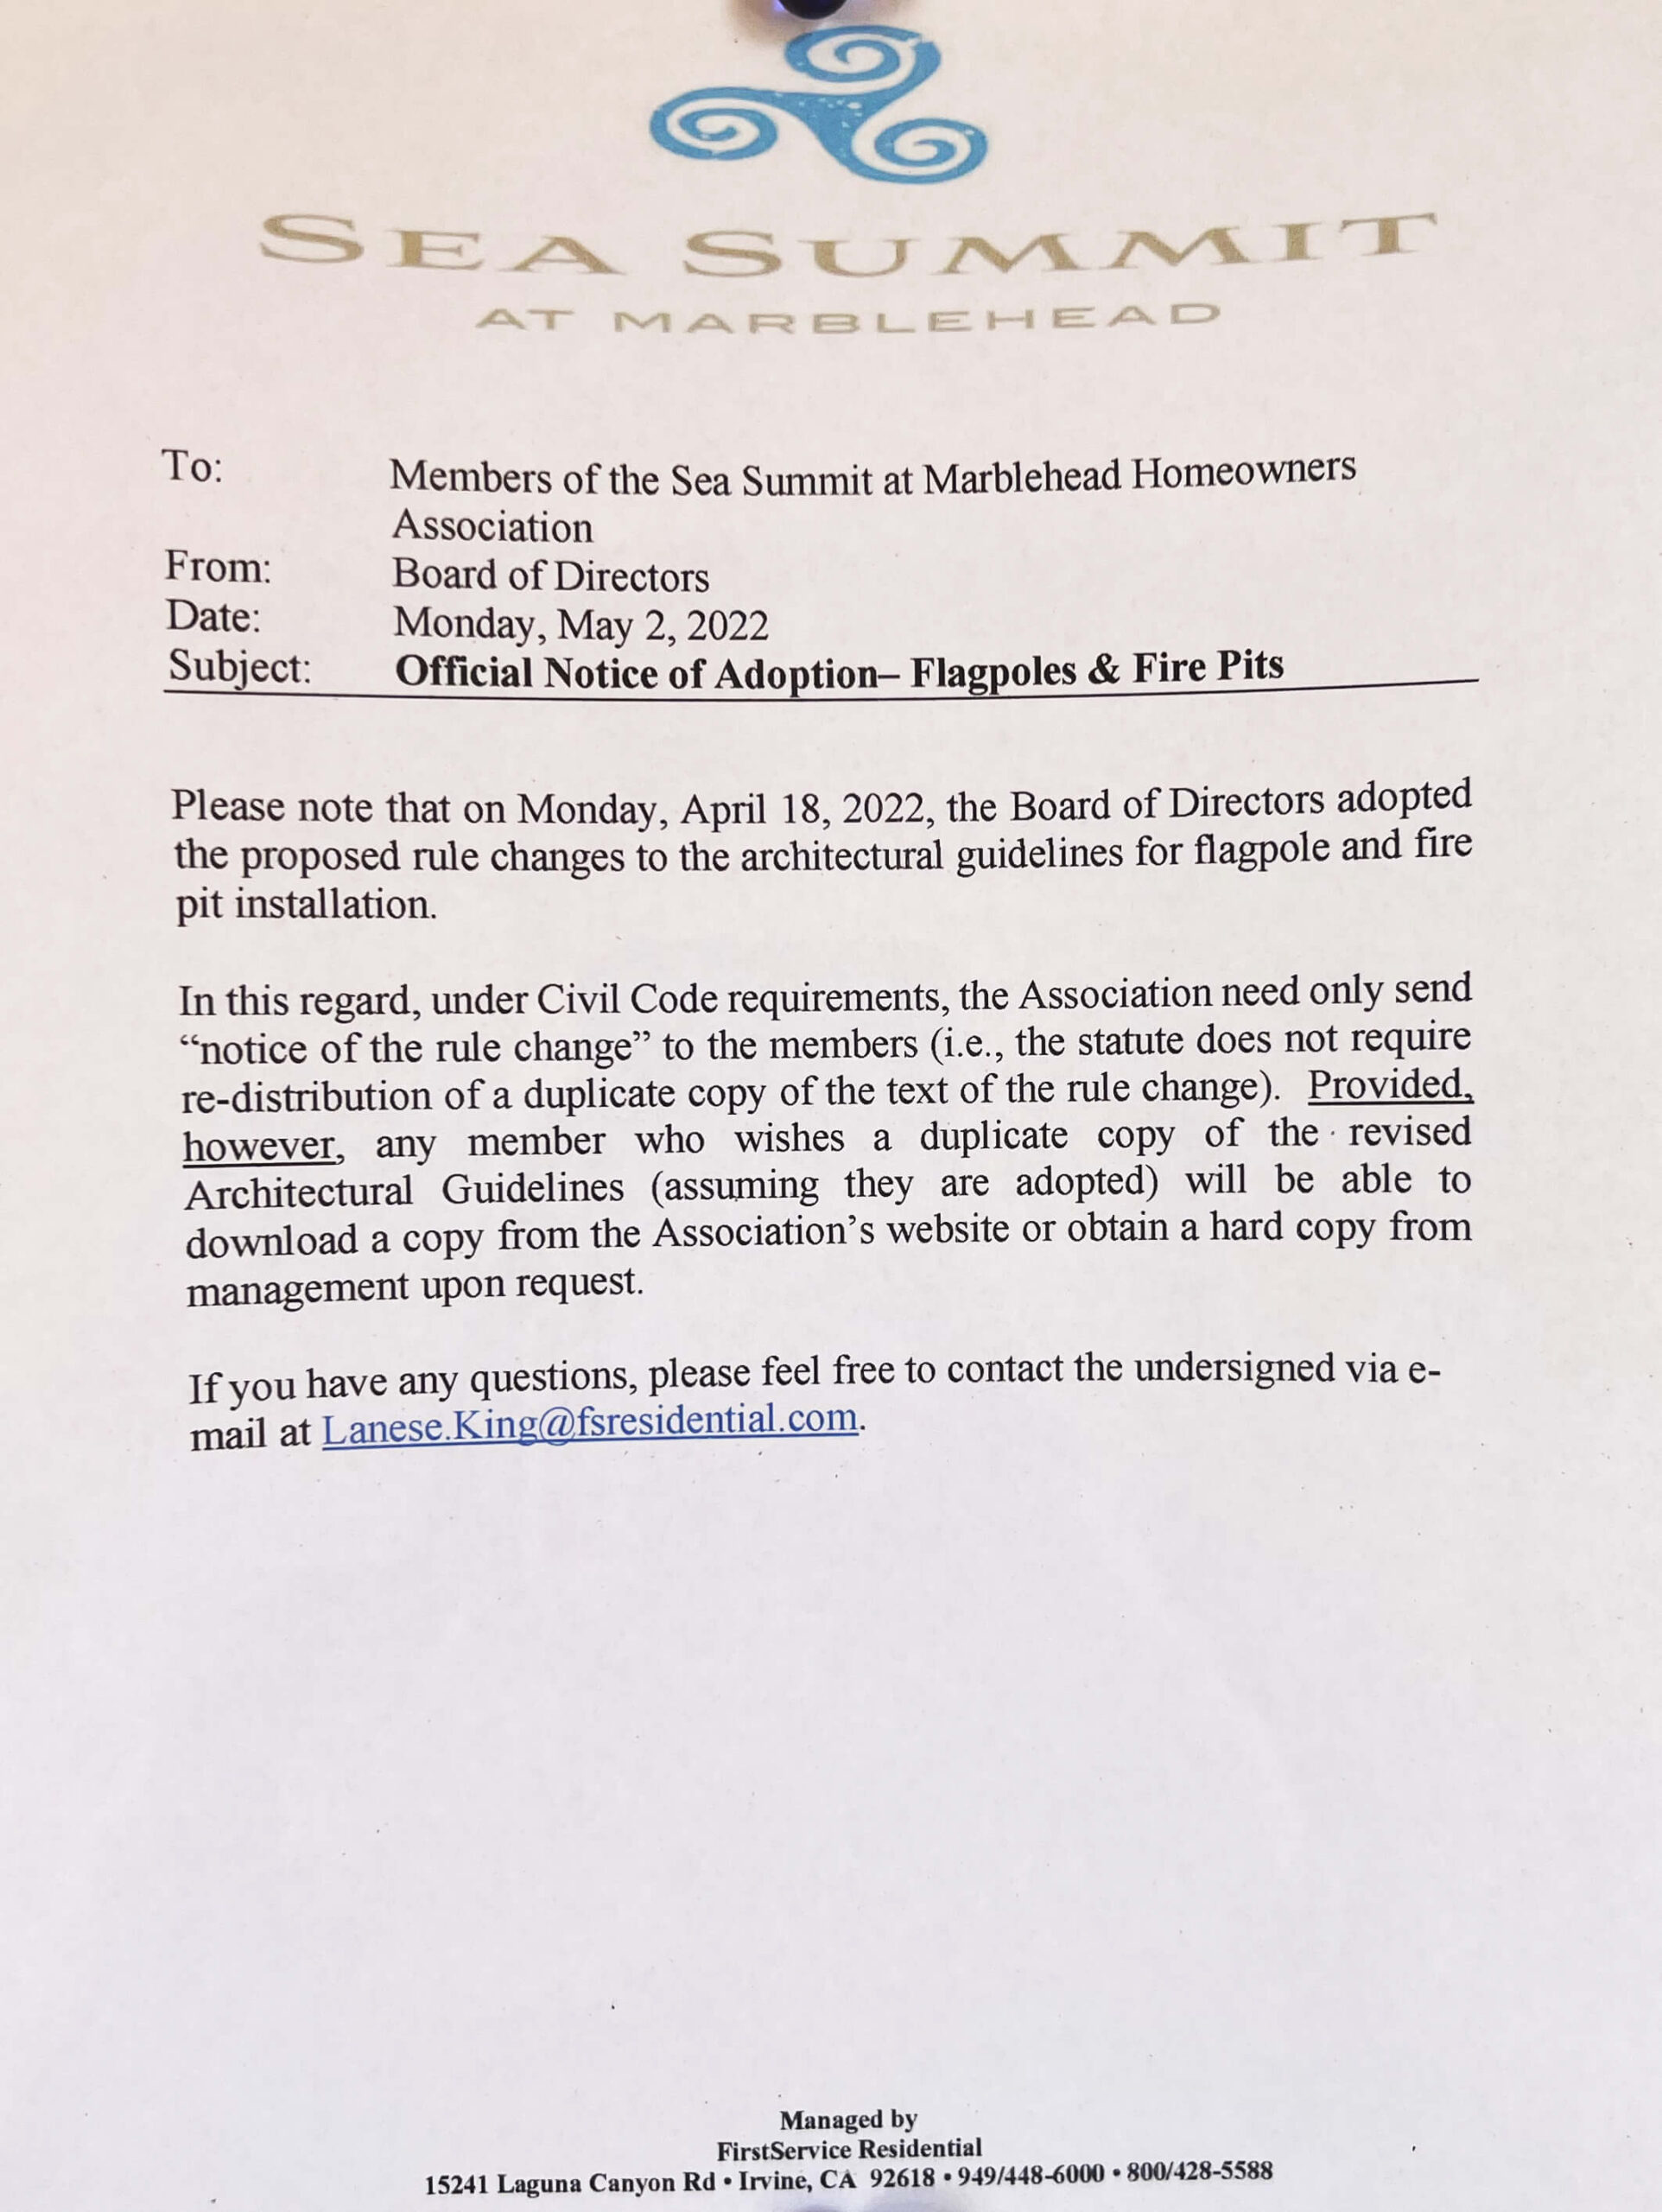 Official Notice of Adoption – Flagpoles & Fire Pits, May 2, 2022